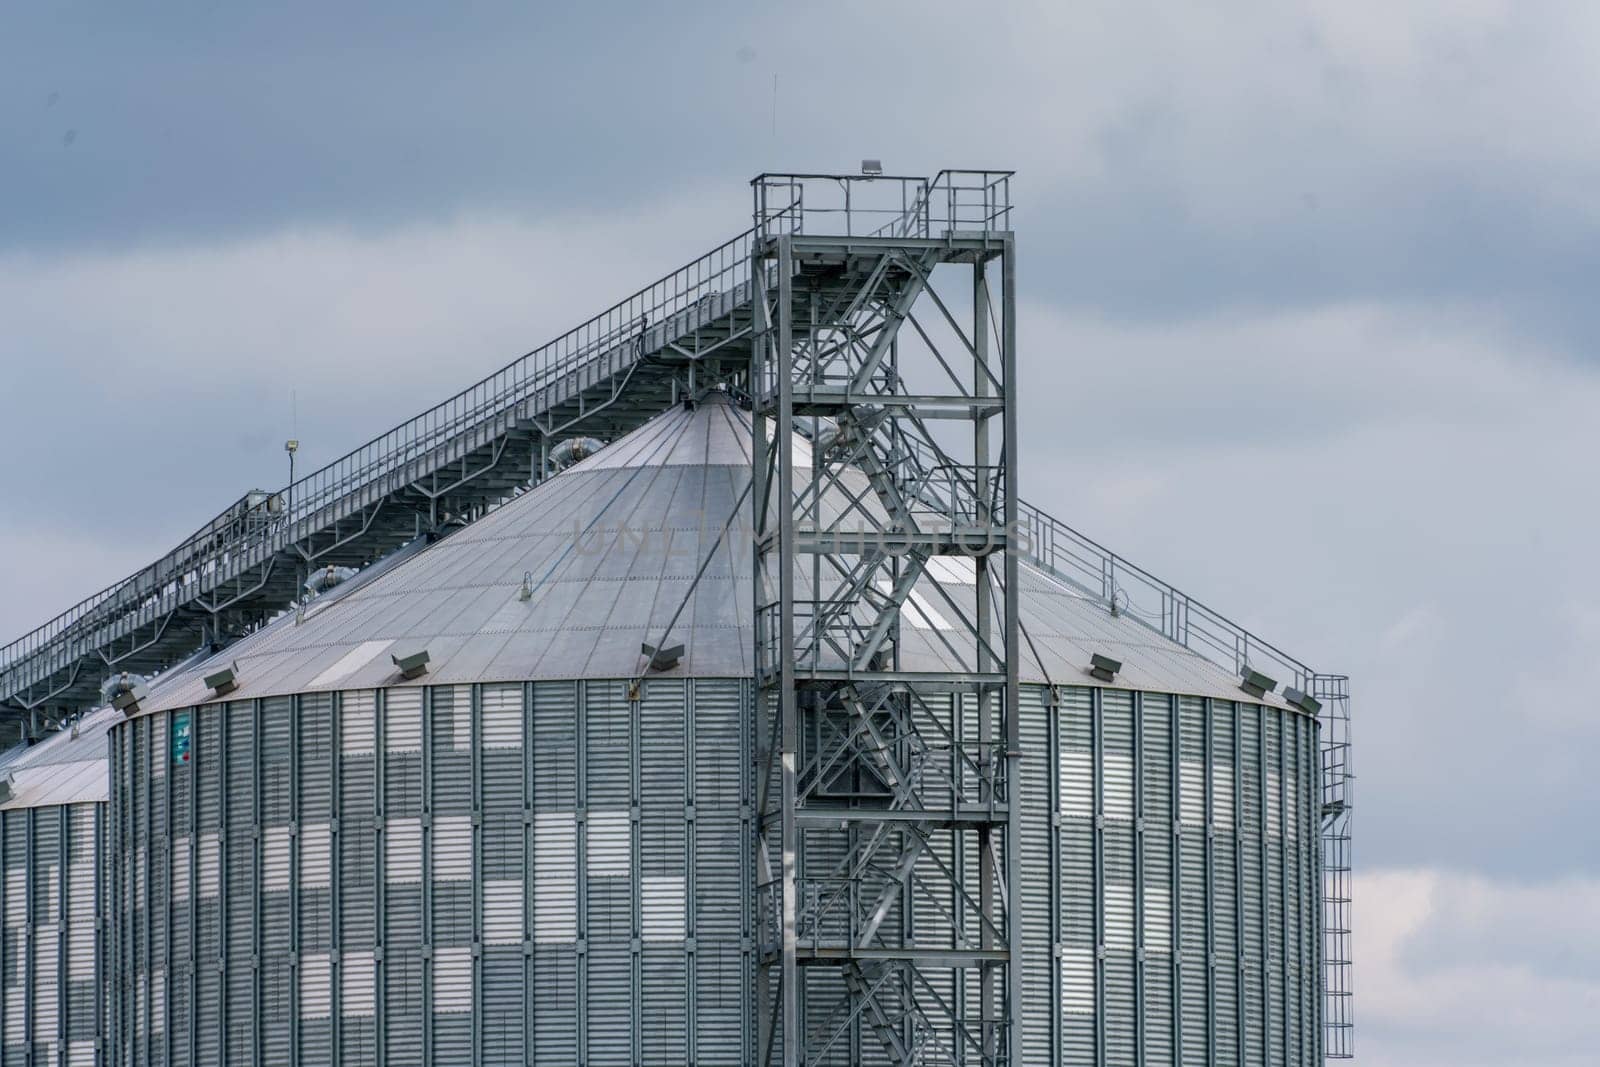 Granary elevator, silver silos on agro manufacturing plant for processing drying cleaning and storage of agricultural products, flour, cereals and grain. Large iron barrels of grain